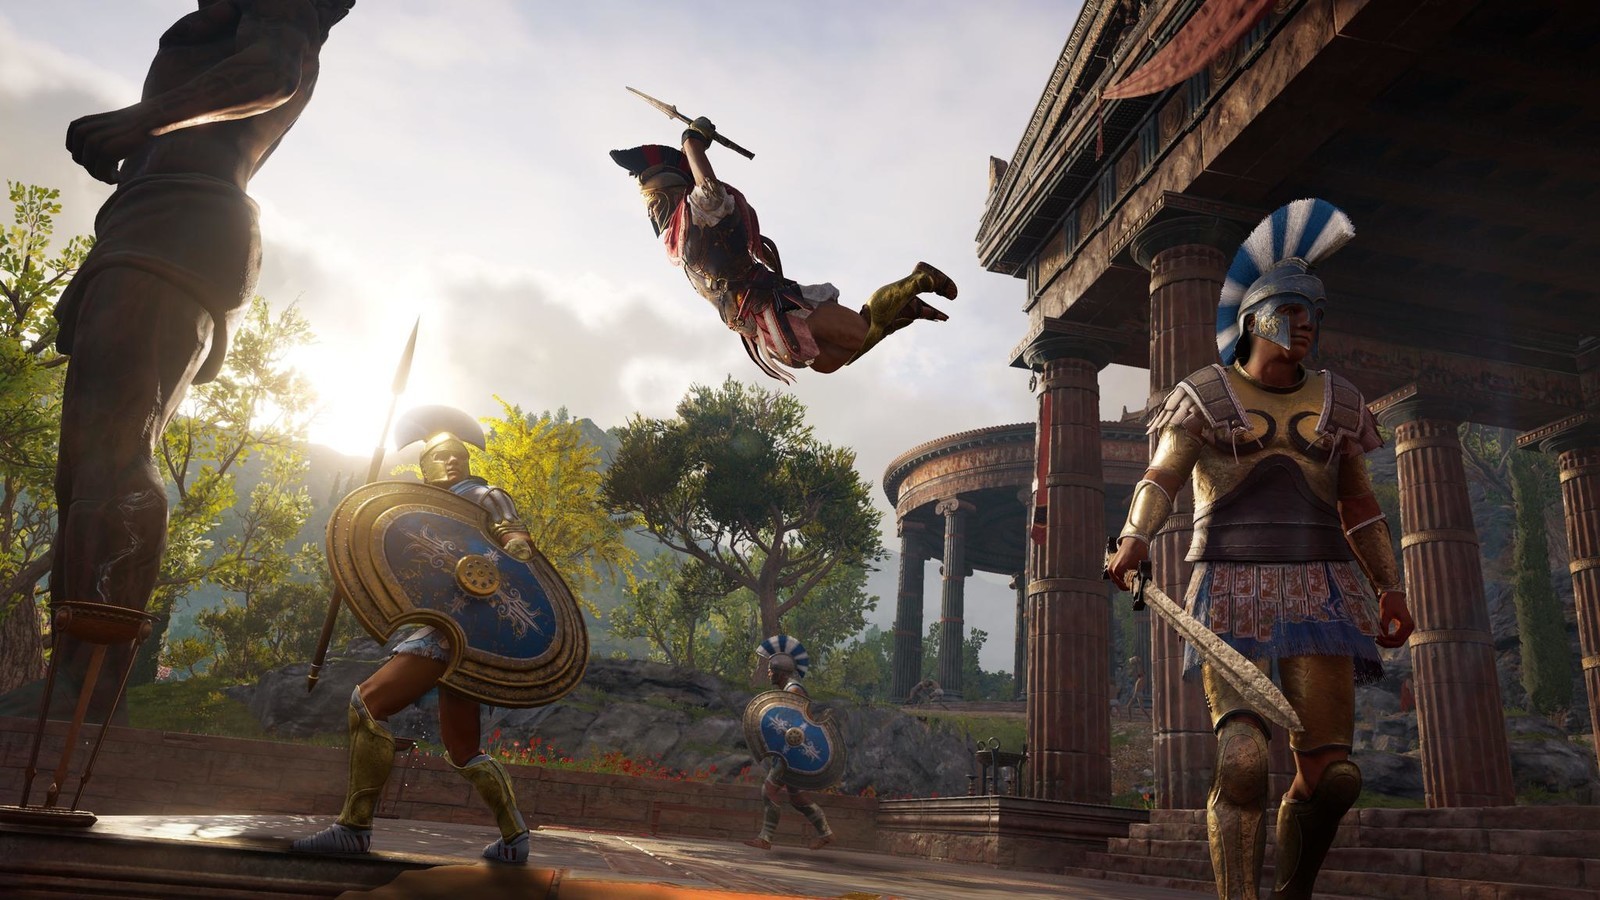 Ubisoft Announces Release Date For Assassin’s Creed Odyssey ‘Legacy of the First Blade’ DLC